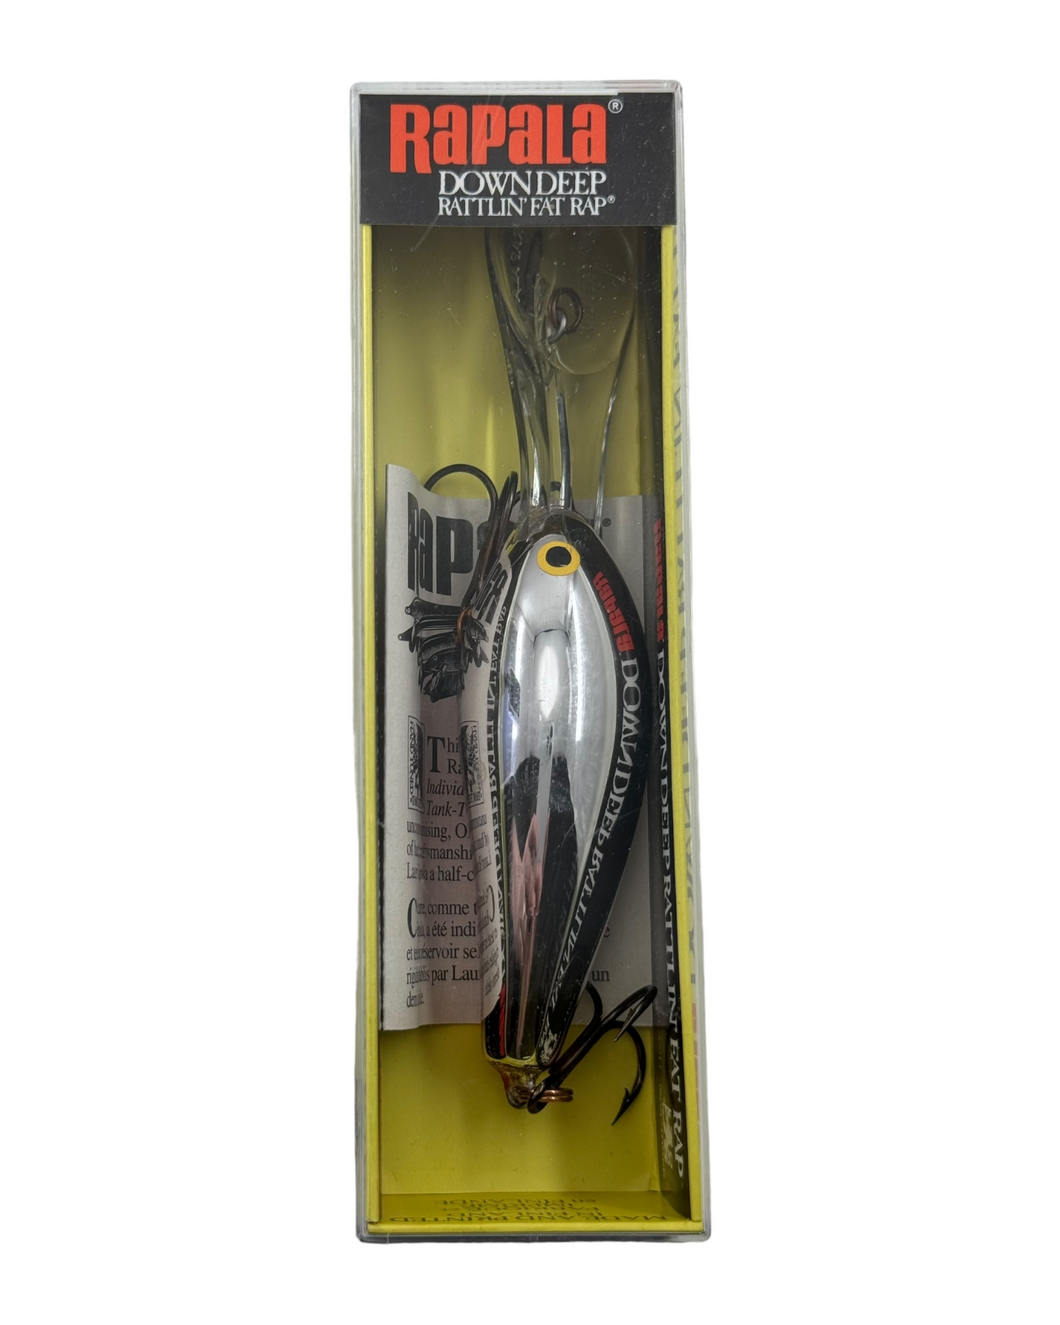 RAPALA LURES DOWN DEEP RATTLIN FAT RAP 7 Fishing Lure • CH – Toad Tackle